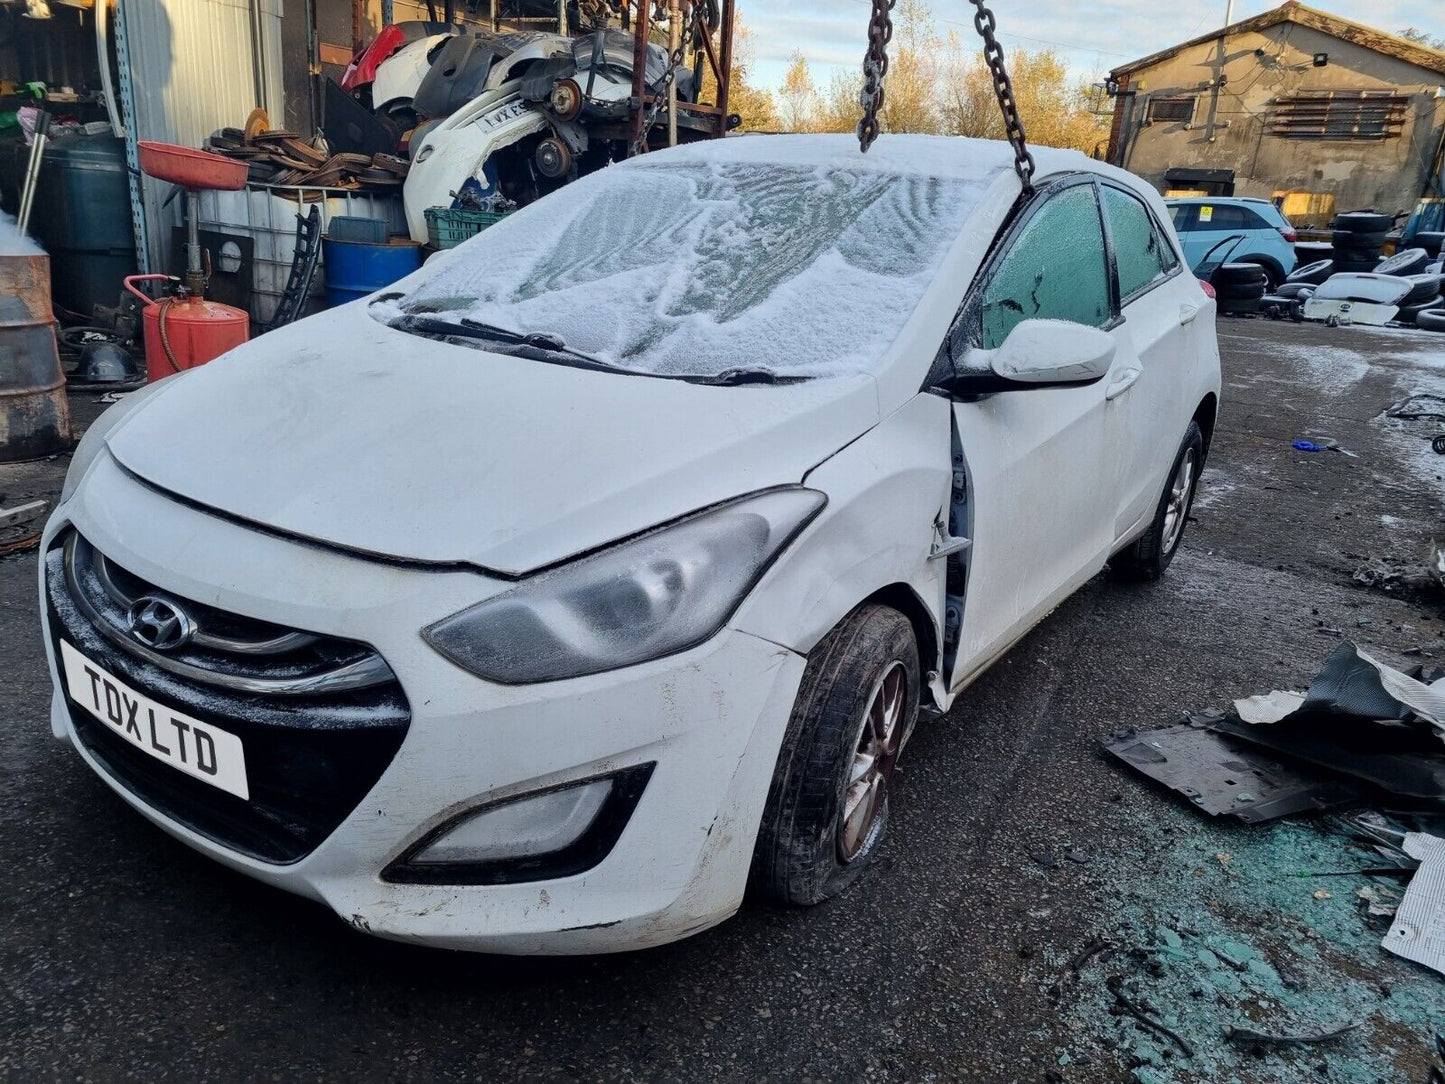 2013 HYUNDAI I30 ACTIVE (GD) MK2 1.6 DIESEL 6 SPEED AUTO FOR PARTS & SPARES